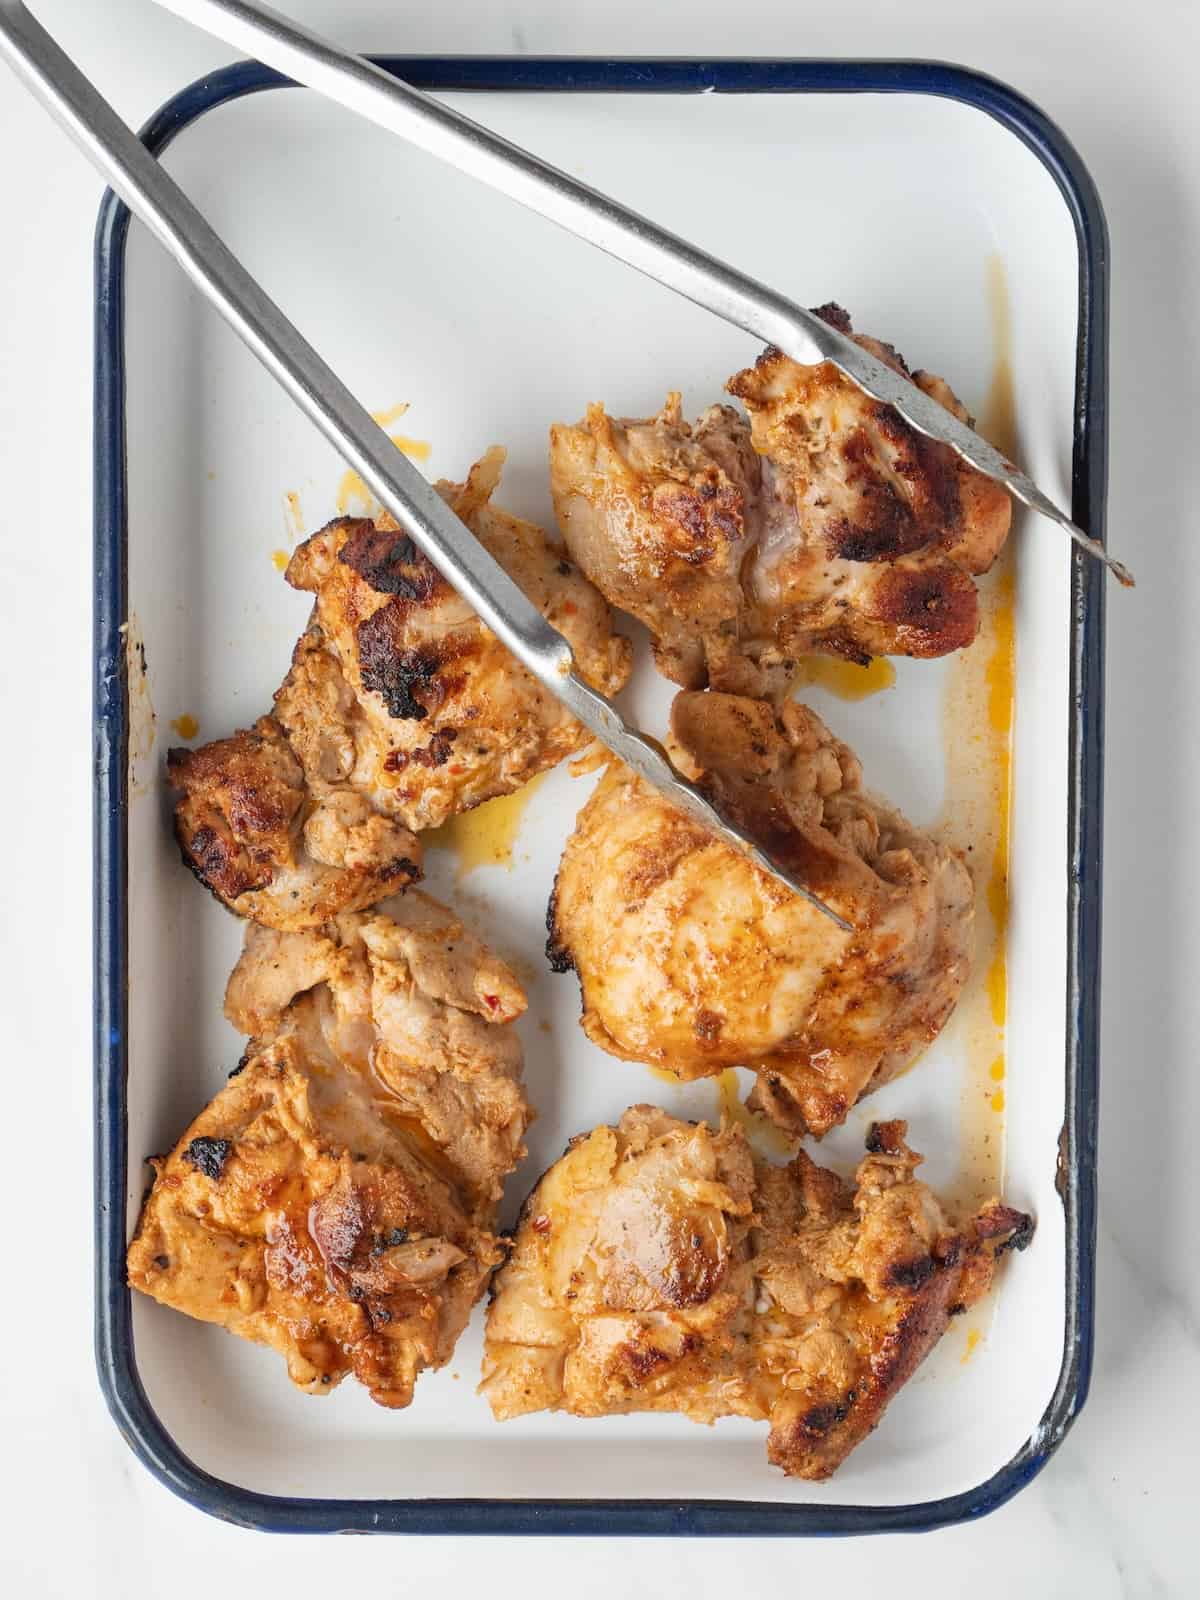 A rectangular dish with cooked chicken thighs being rested after cooking along with tongs.